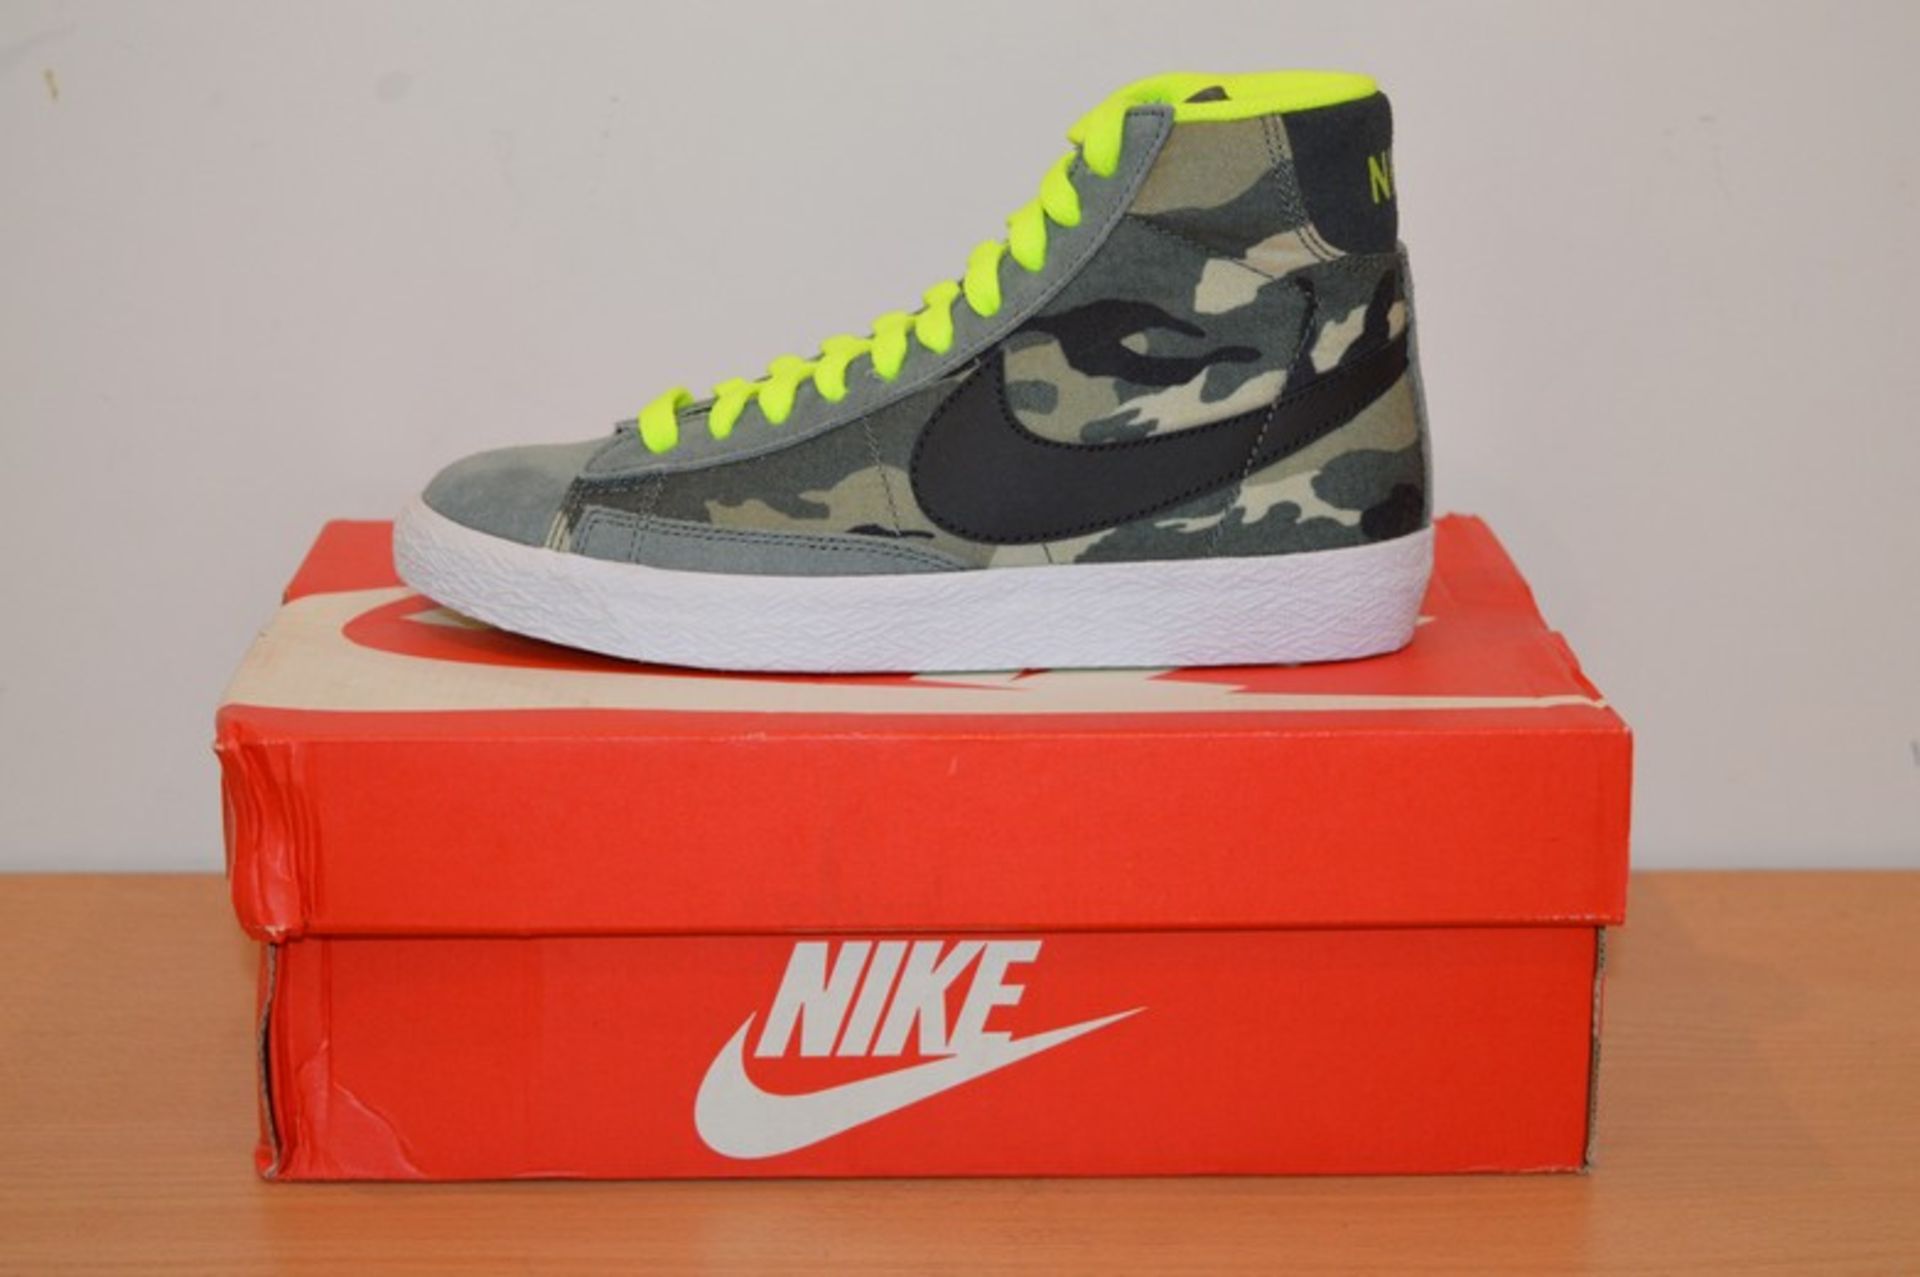 BOXED BRAND NEW NIKE BLAZER CAMO AND GREEN TRAINERS IN UK SIZE 3 RRP £65 (DSCLIP)(23.03.15)